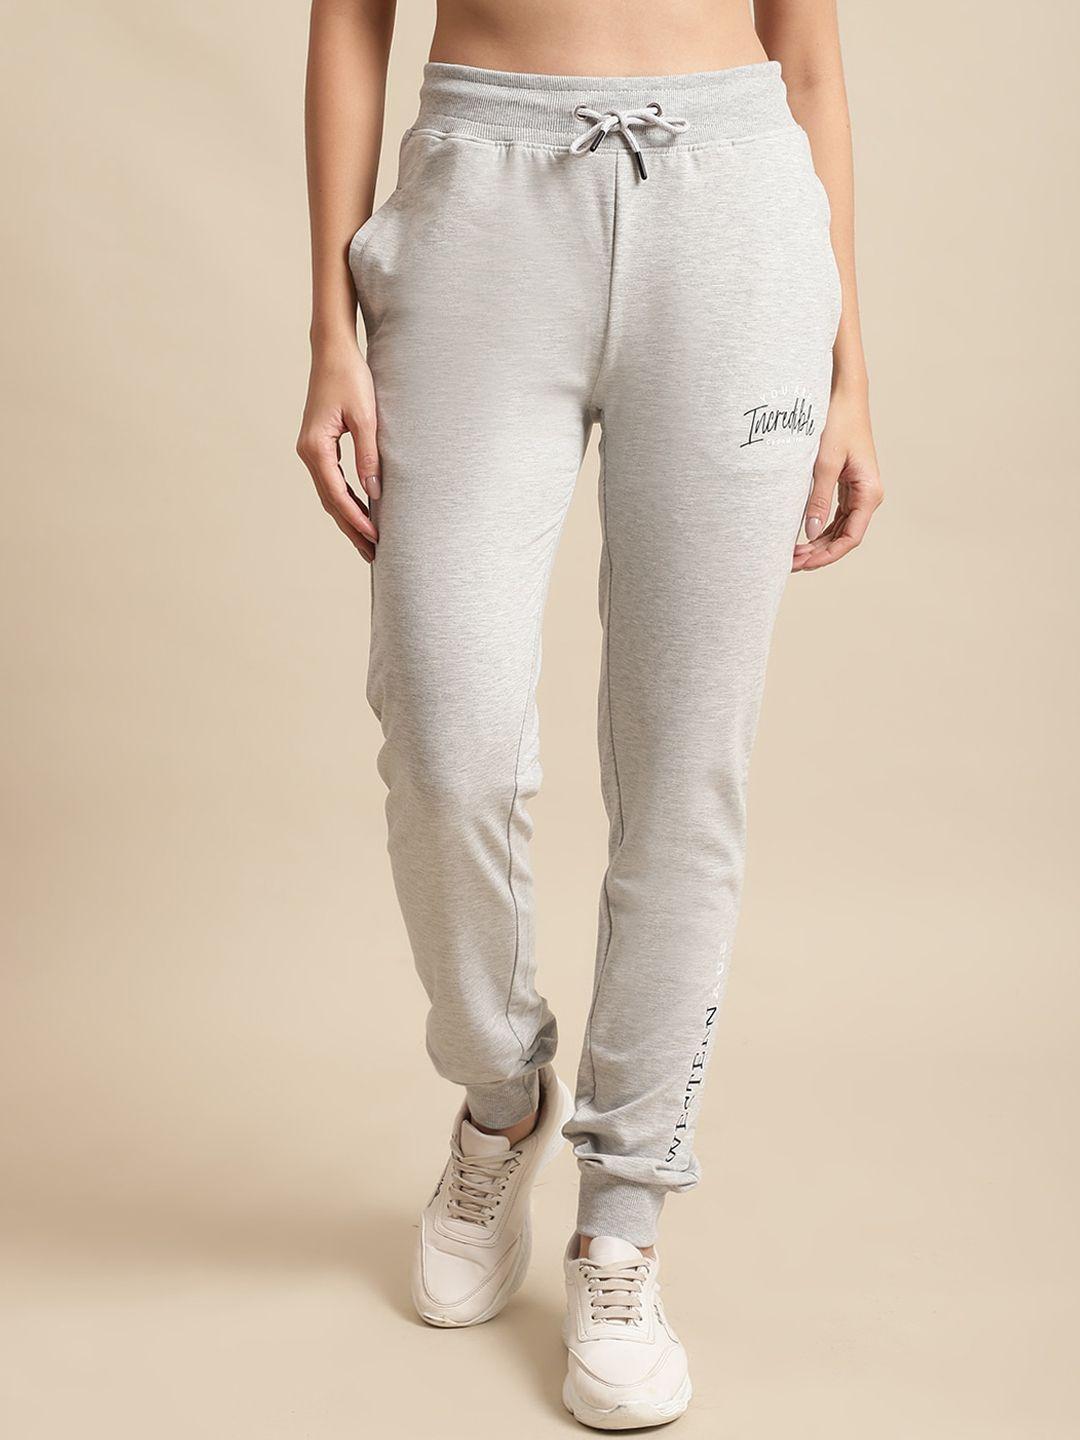 Cantabil Women Printed Cotton Joggers